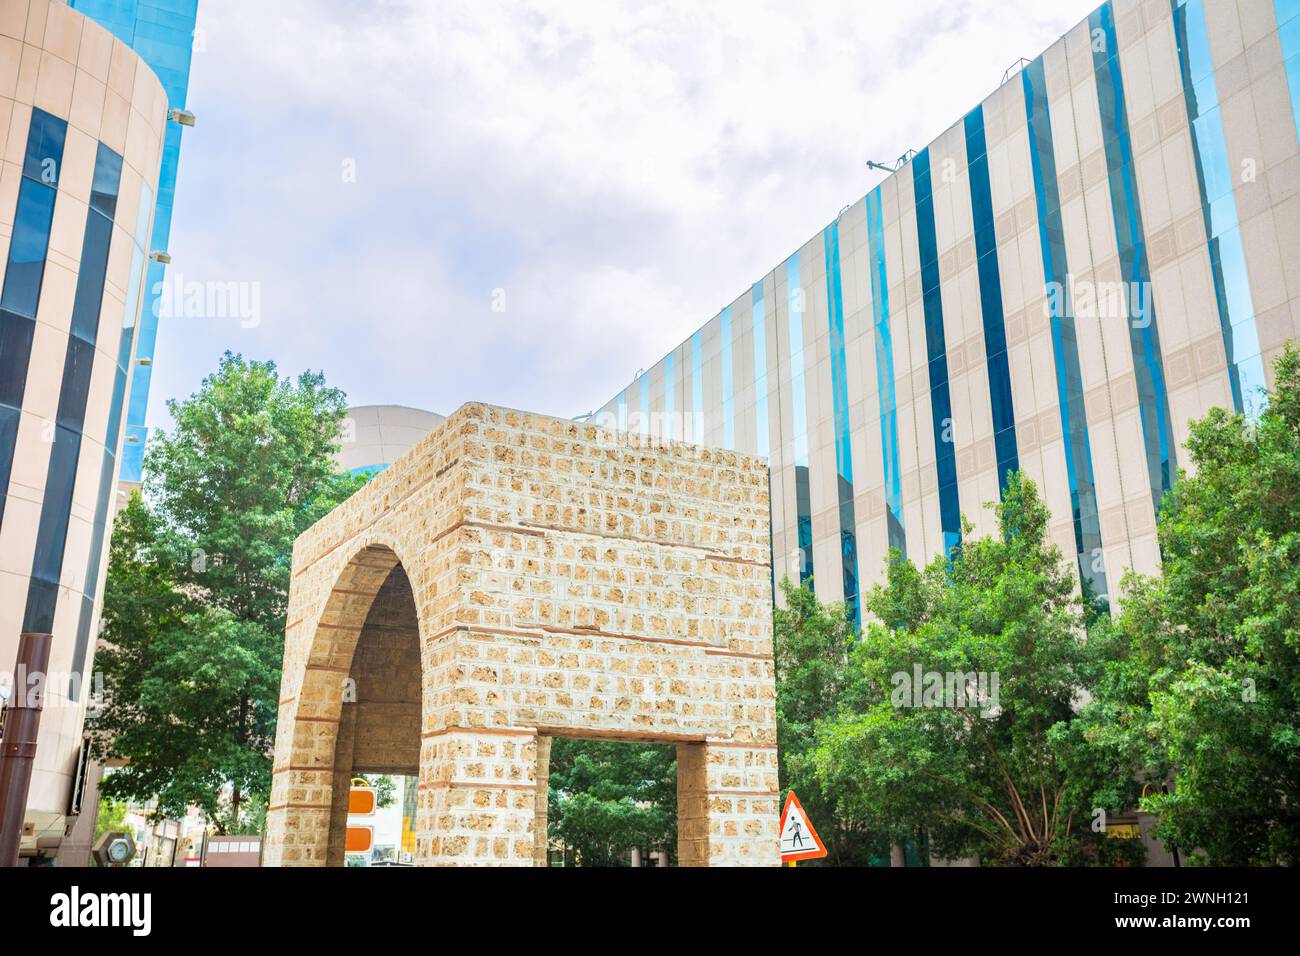 Arch of ancient Bab Alfurdhah Gate surrounded by modern office buildings on the street of Al-Balad, Jeddah, Saudi Arabia Stock Photo